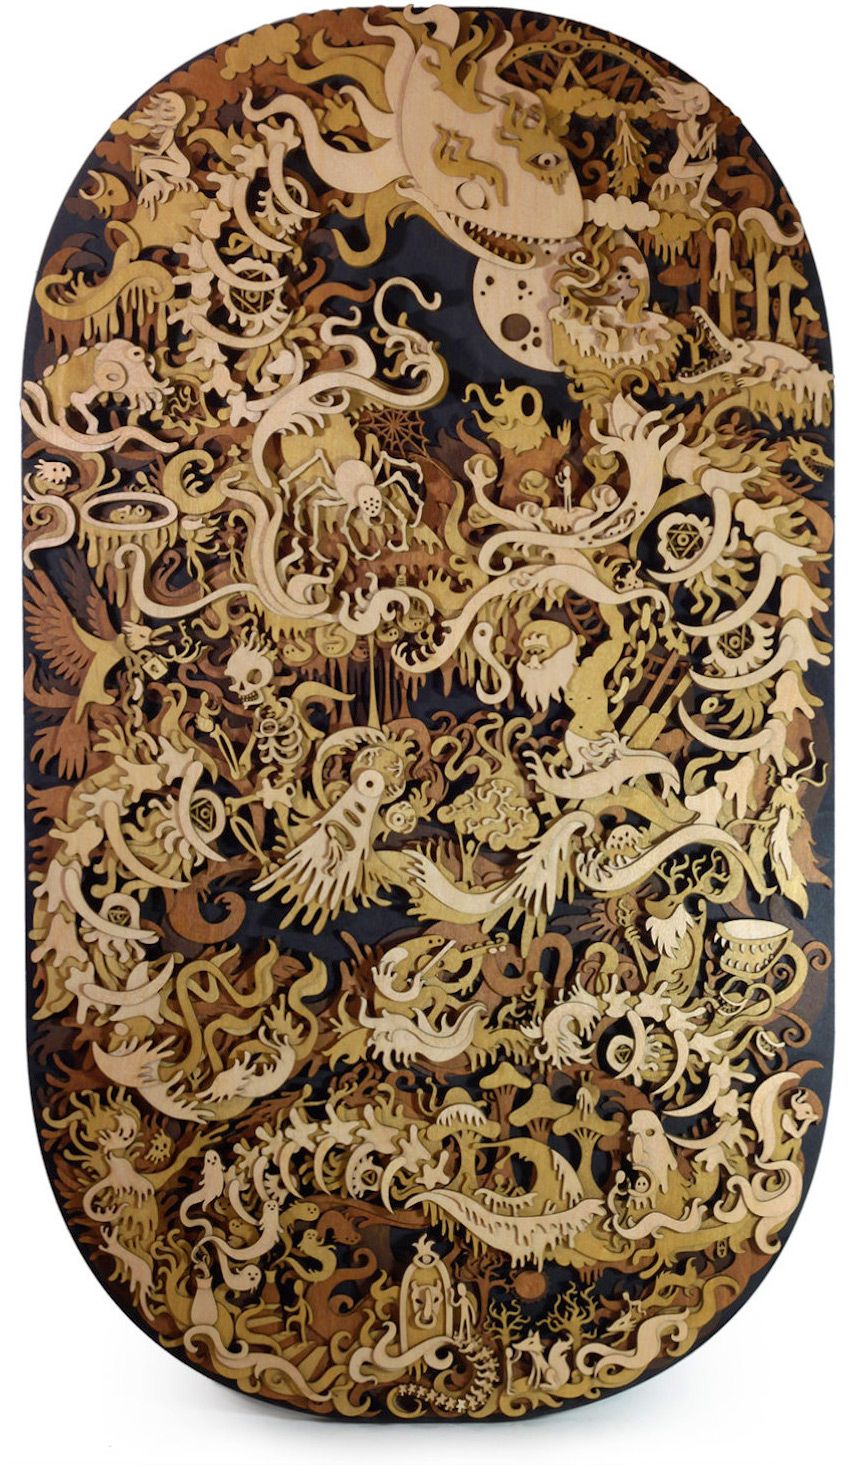 New Laser Cut Wood Illustrationsmartin Tomsky — Colossal Regarding Most Recently Released Intricate Laser Cut Wall Art (Gallery 11 of 20)